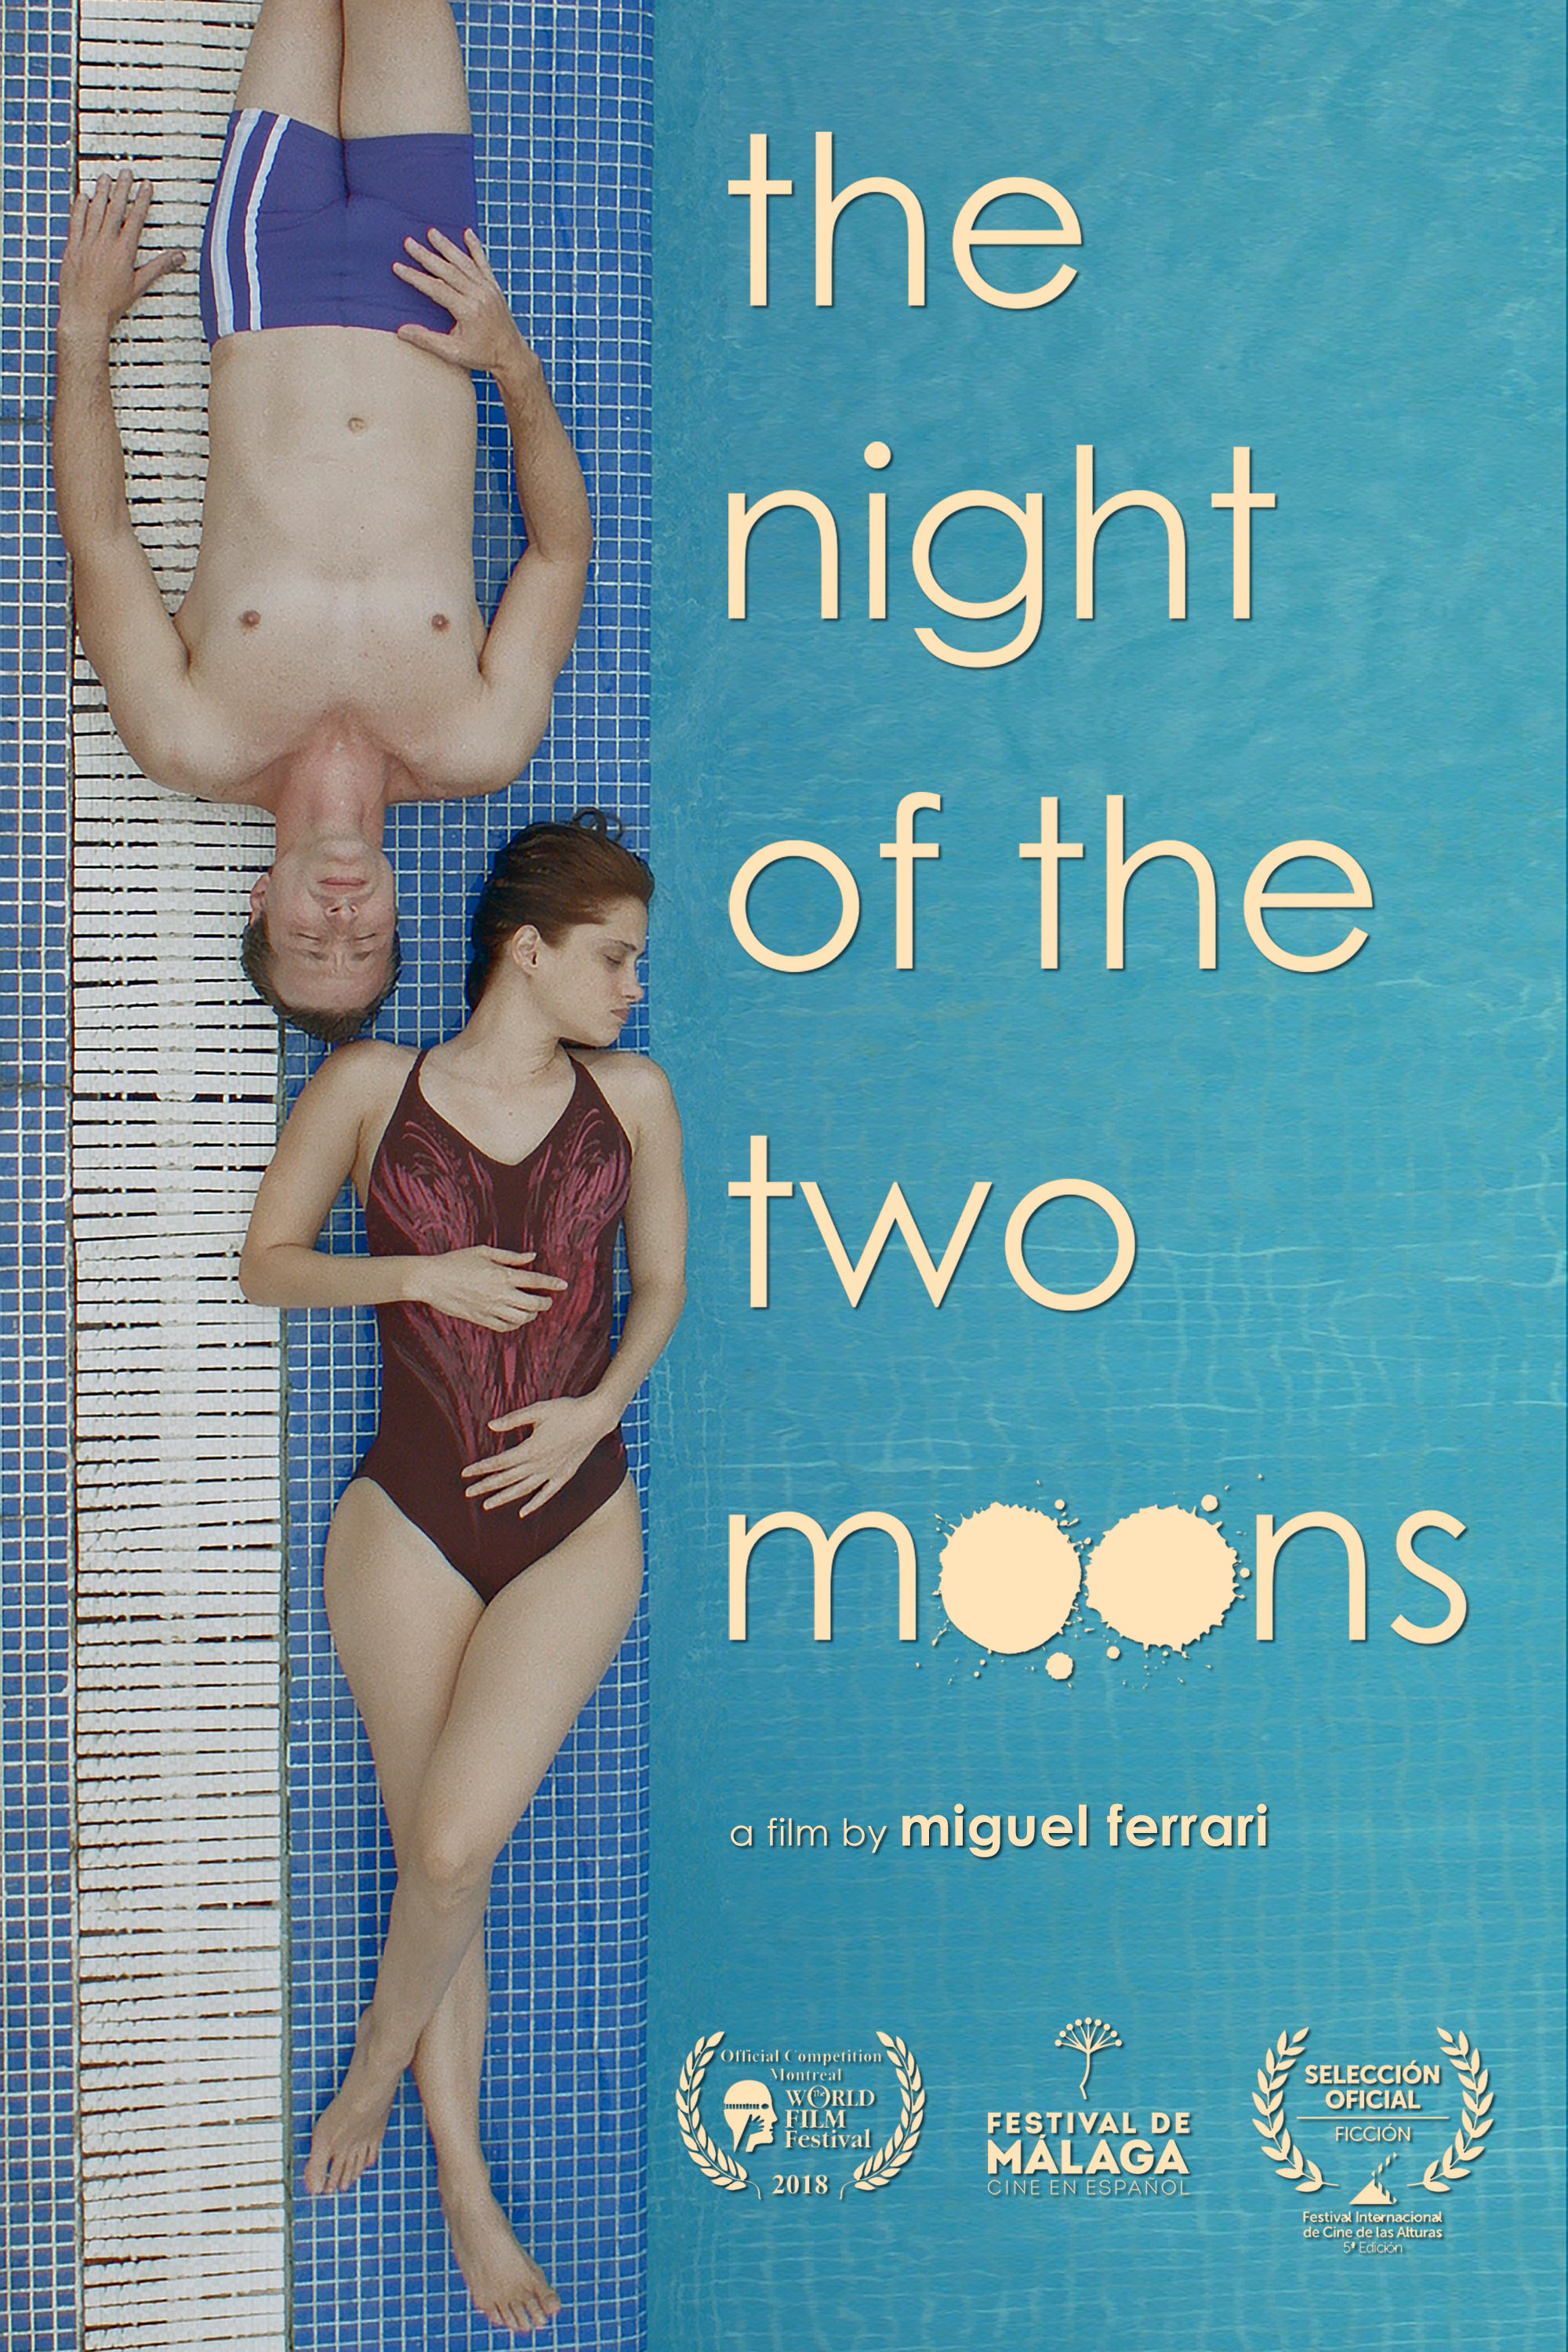 night of two moons